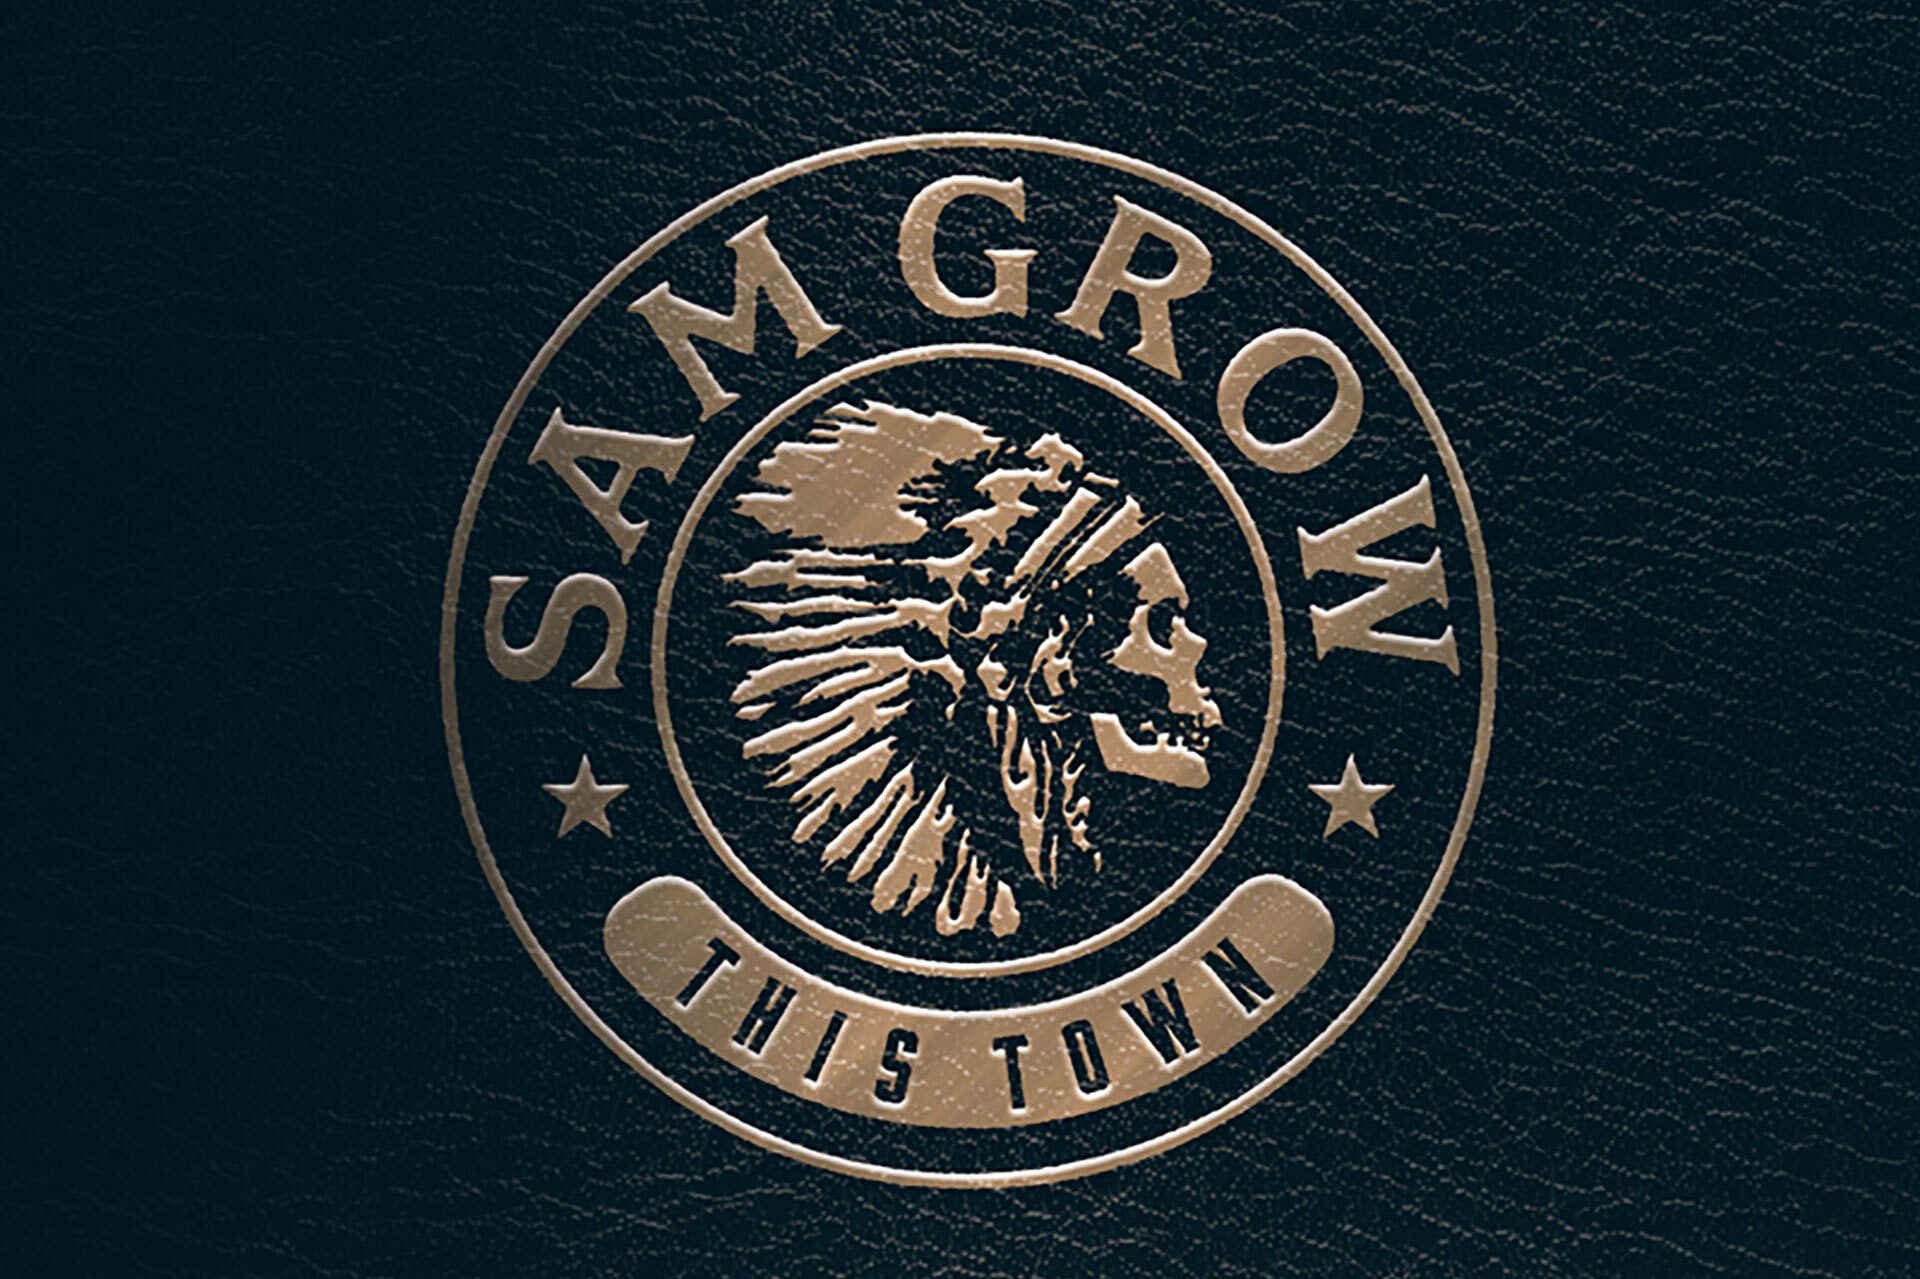 Sam Grow Releases New Album, 'This Town'